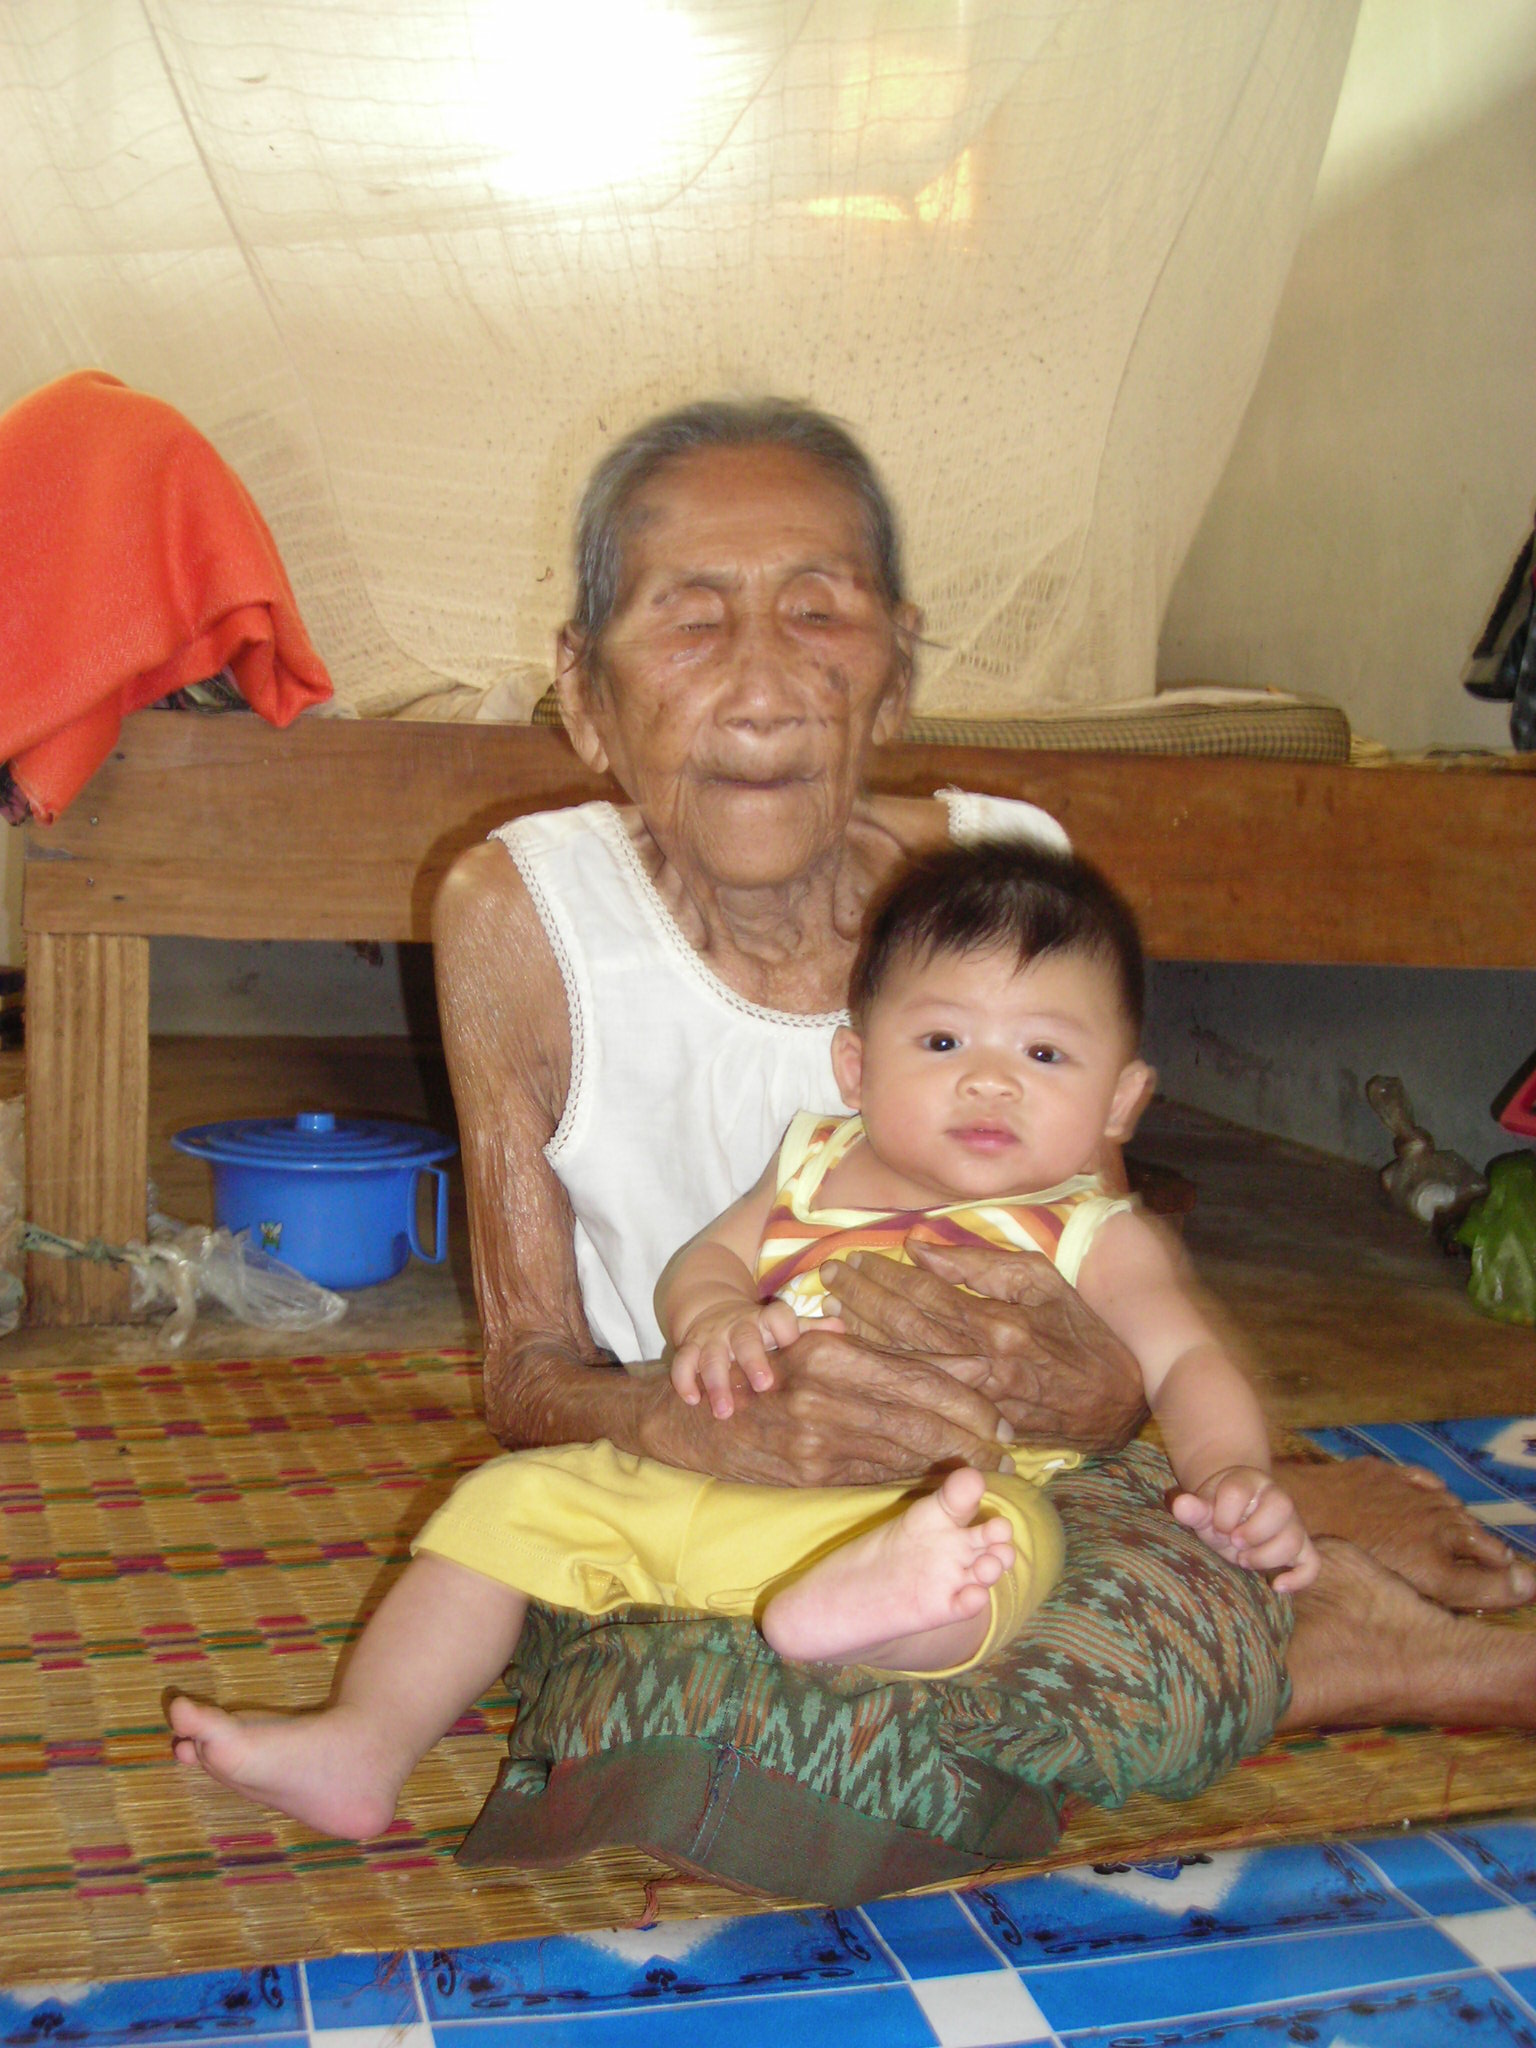 File:Old woman with young baby boy.JPG - Wikimedia Commons